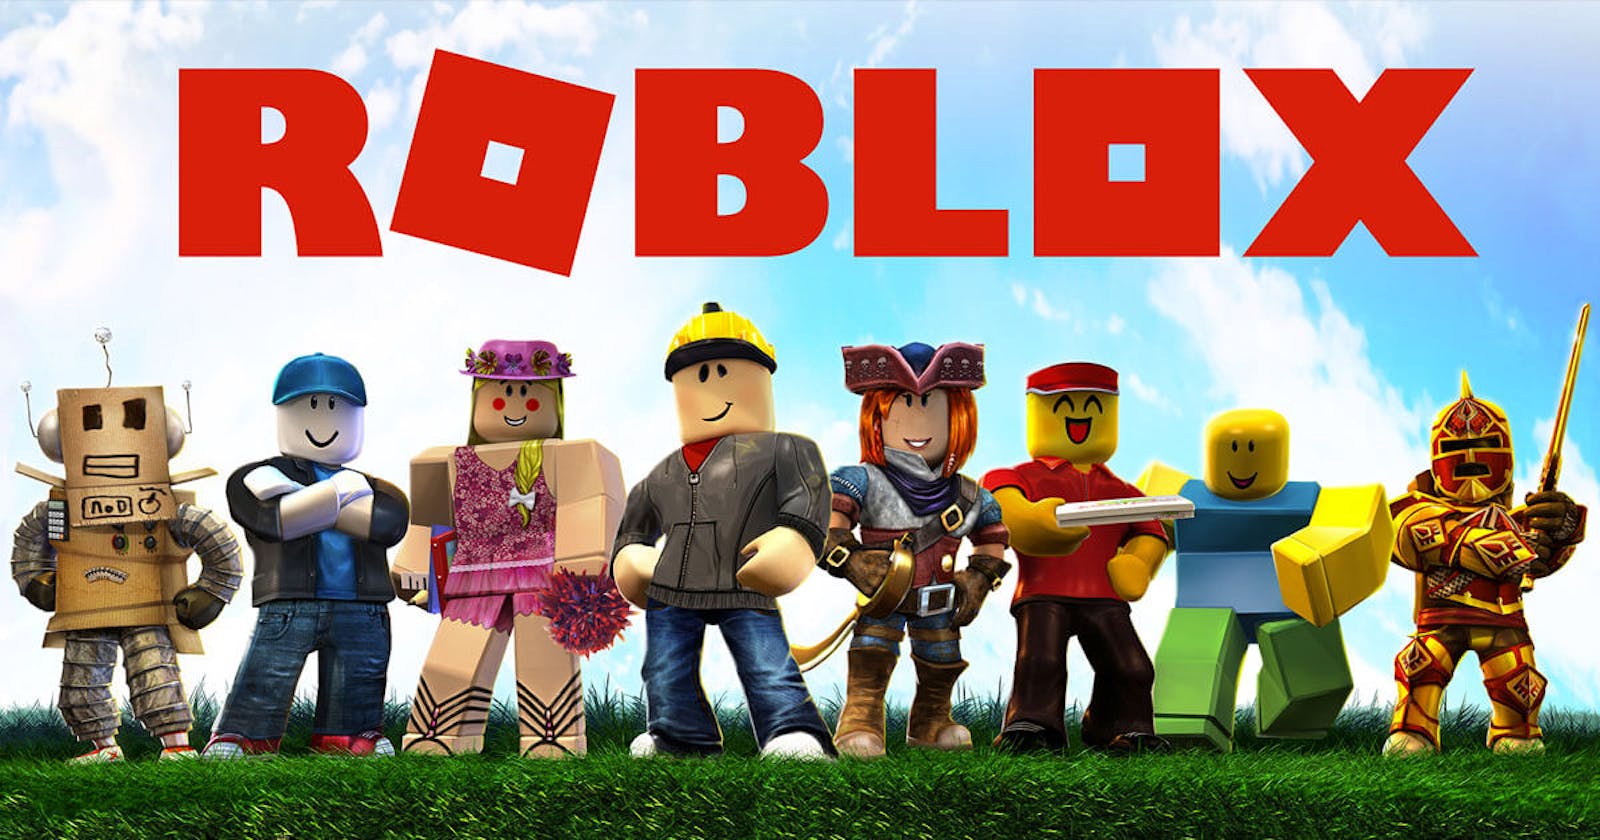 Advertisement of Roblox mobile game